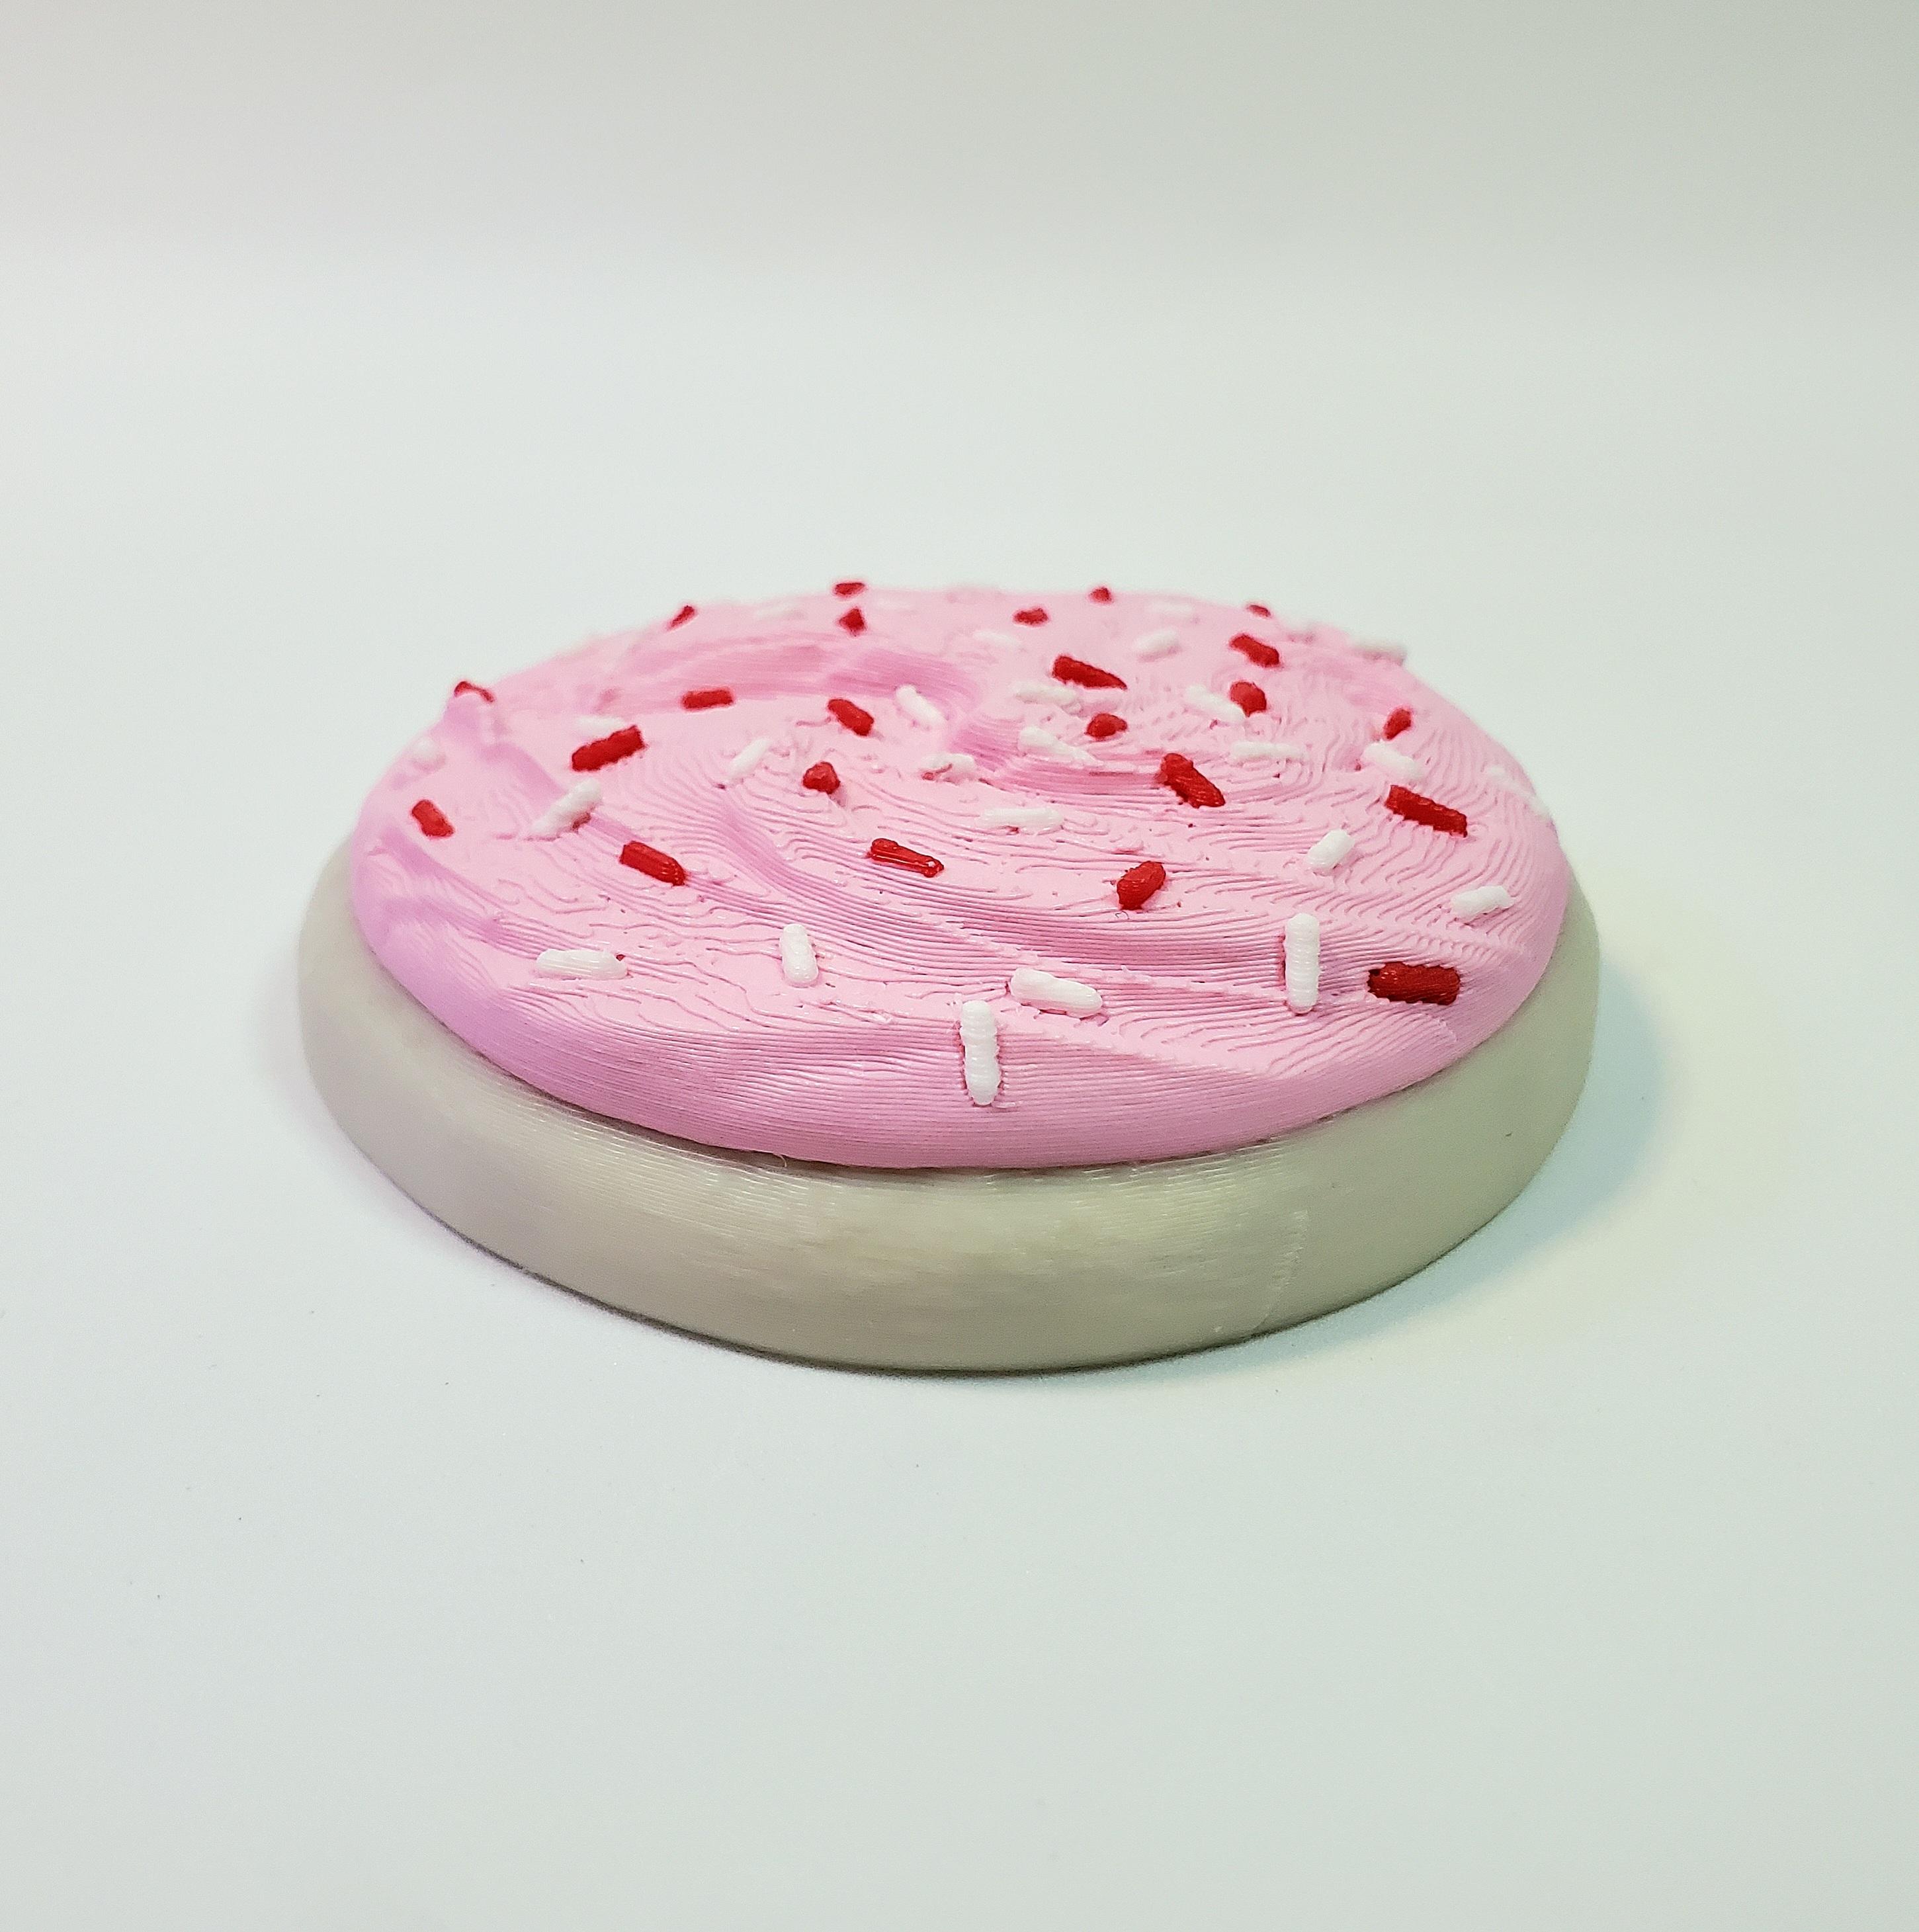 Sugar Cookie with Buttermilk Frosting & Sprinkles :: Delicious Desserts! 3d model